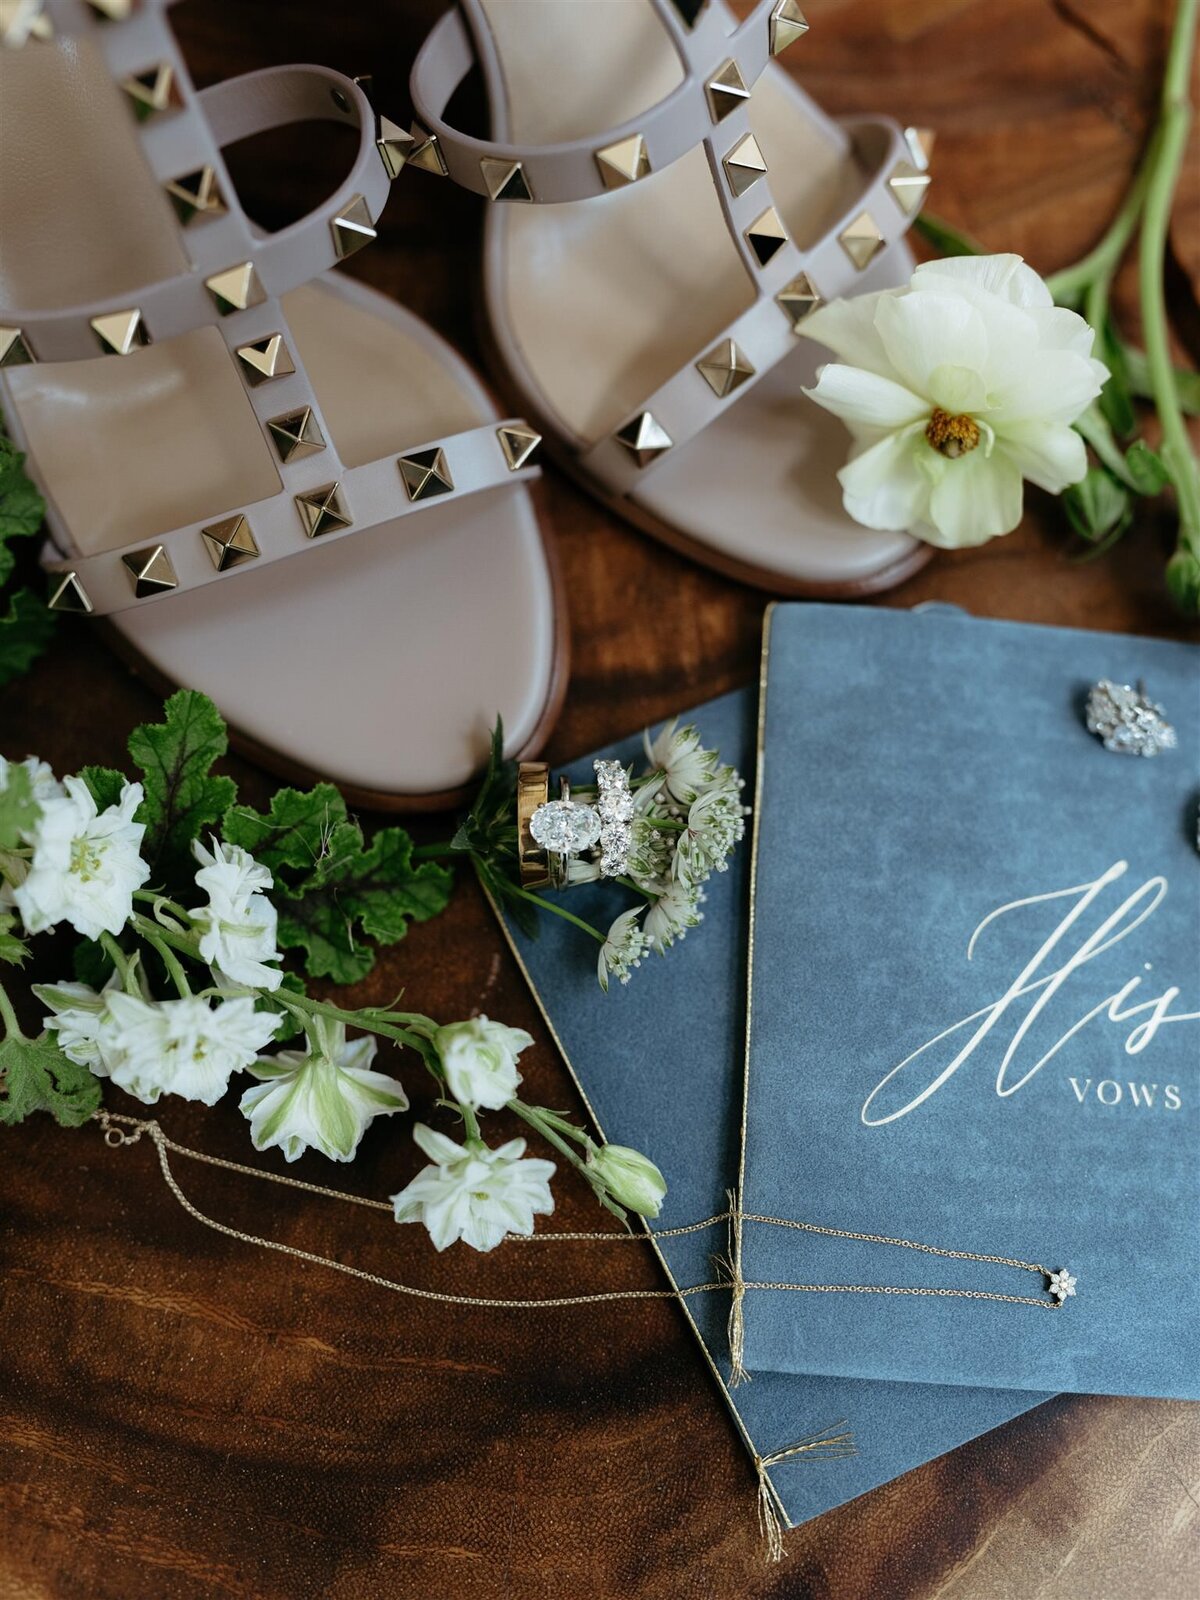 Detail photo of bride's gold-studded shoes, white floral accents, dainty gold necklace, and little blue book of vows.